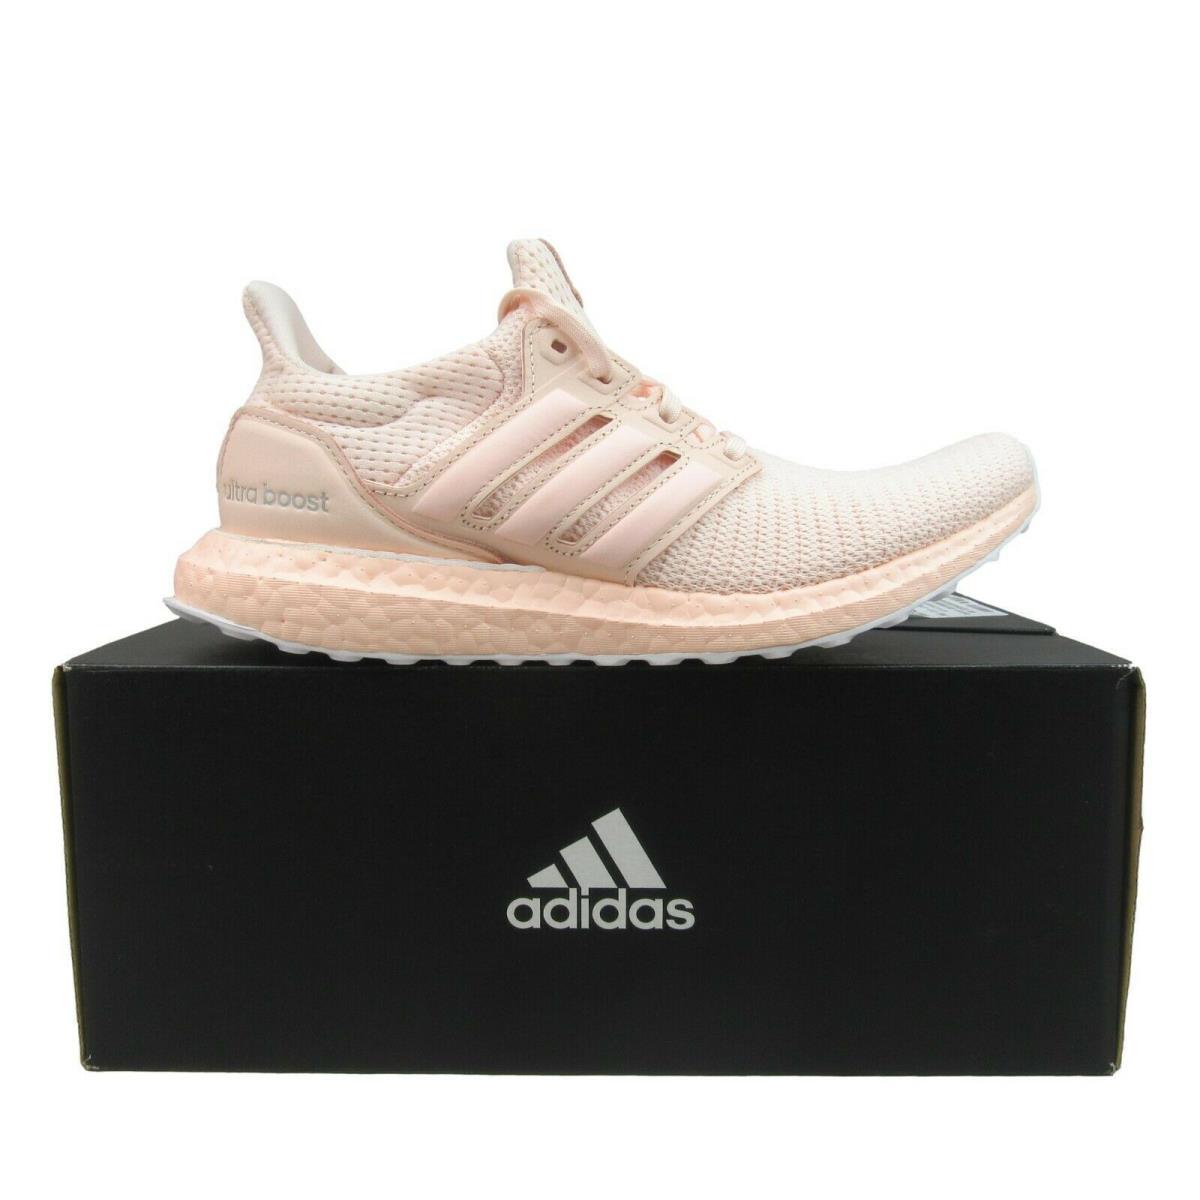 Adidas Ultraboost Dna Pink Tint Boost White Primeknit Women`s Sizes FY6828